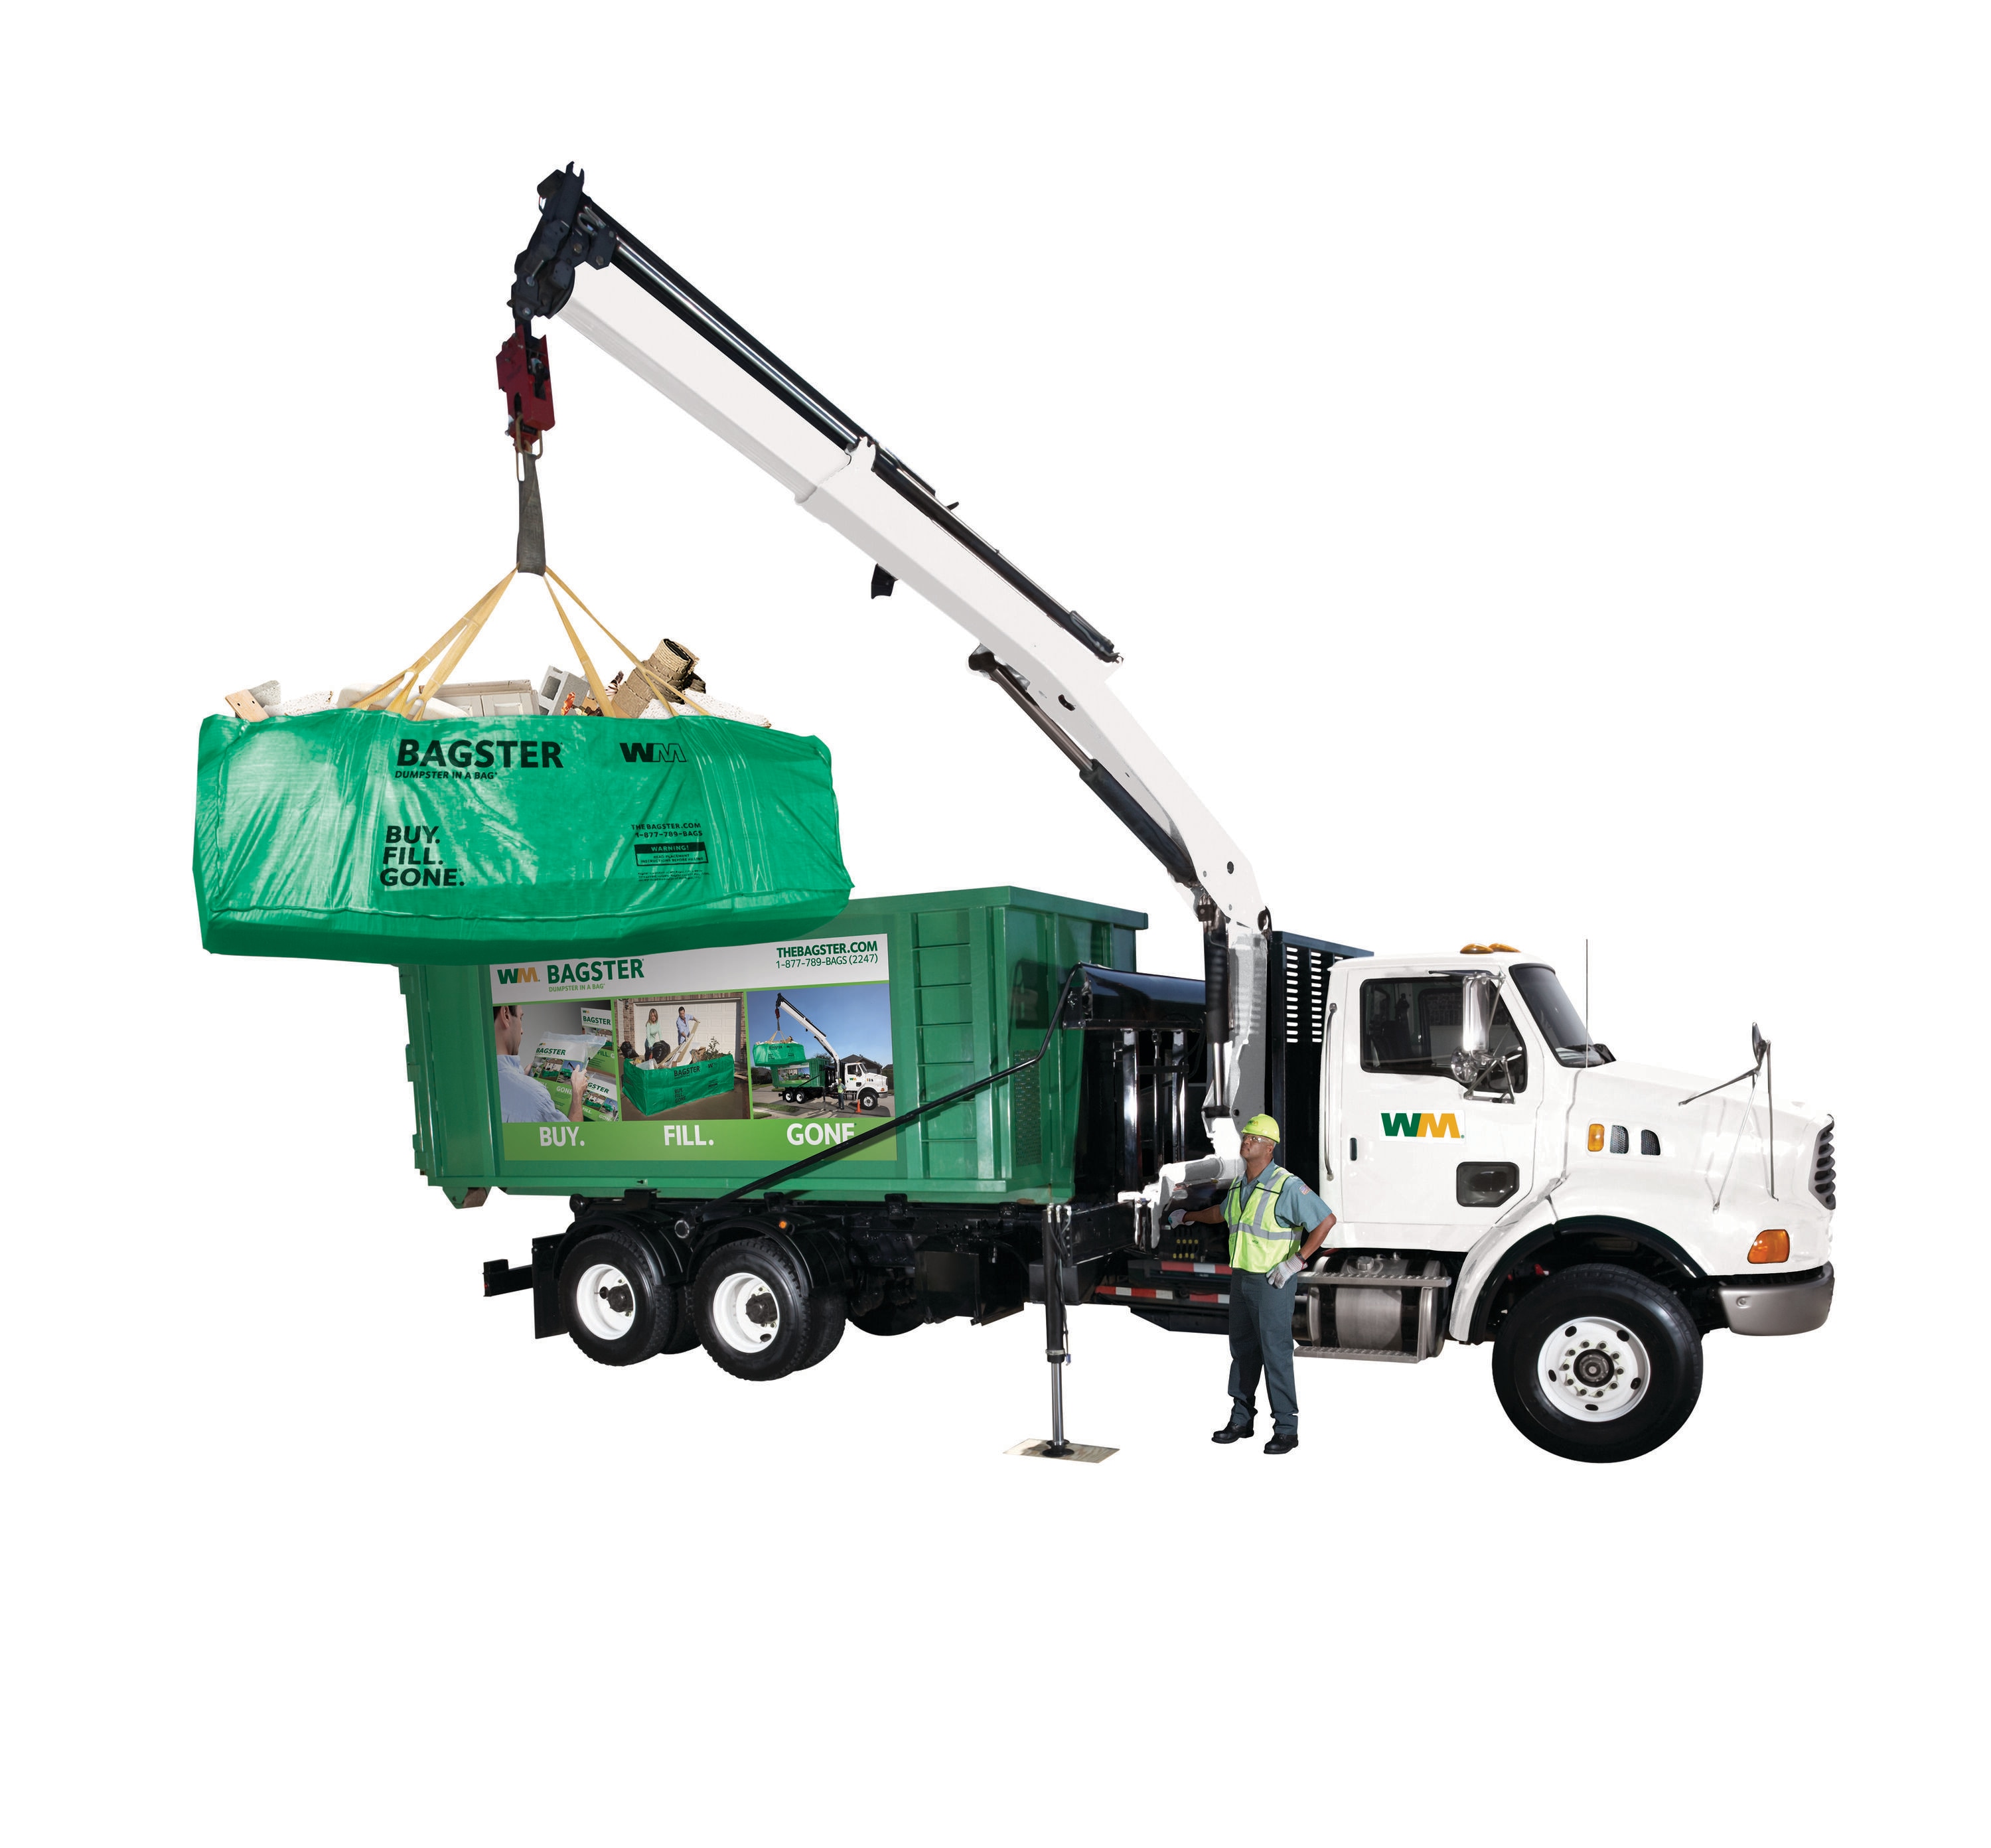 Waste Management BAGSTER 3 CU YD Dumpster in a Bag Holds up to 3300 lb